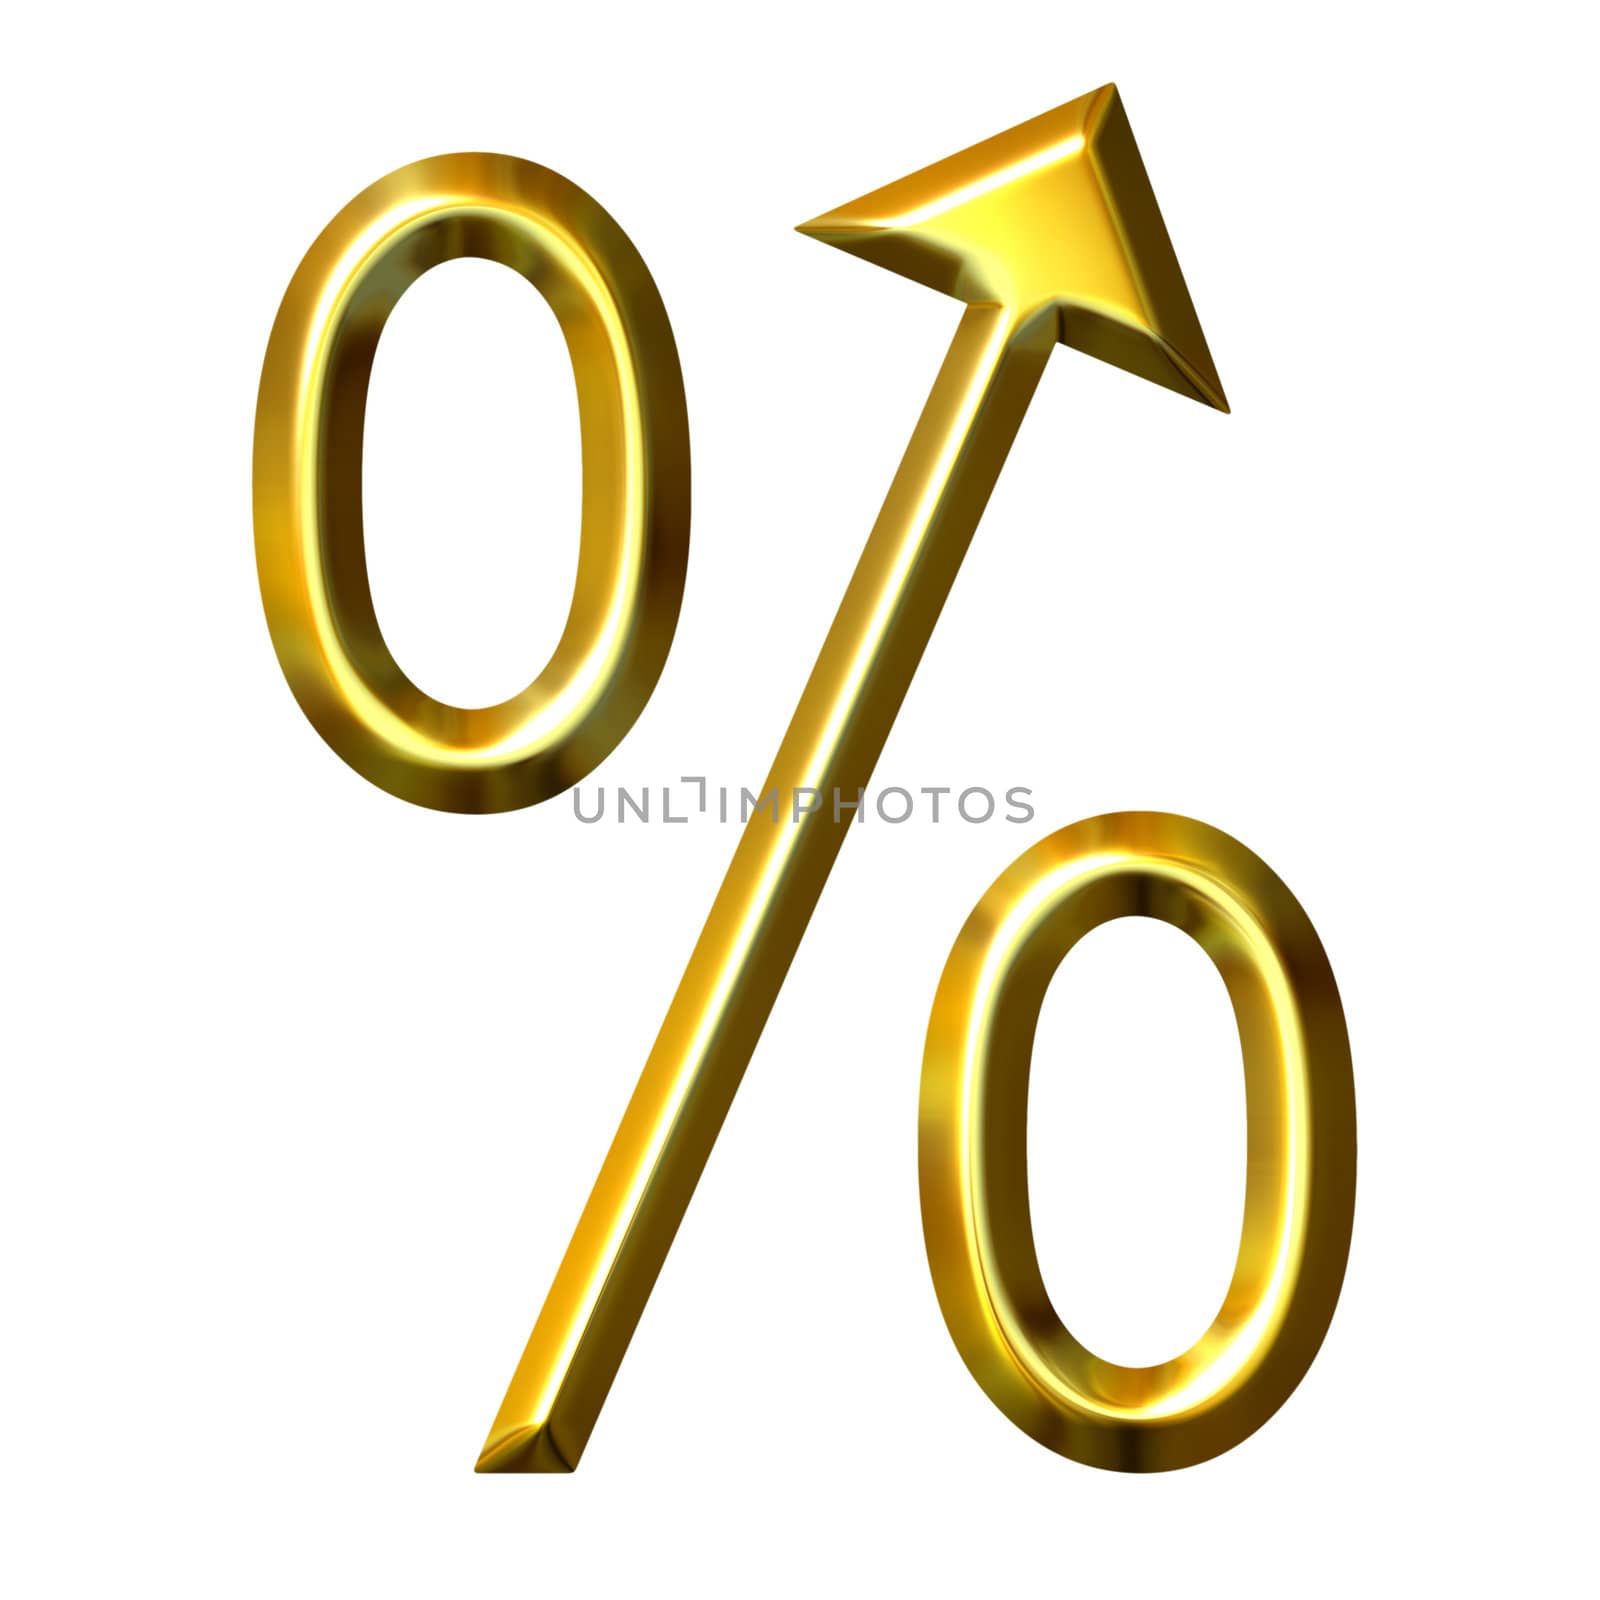 3D Golden Percent Symbol with Integrated Arrow Directed Up by Georgios